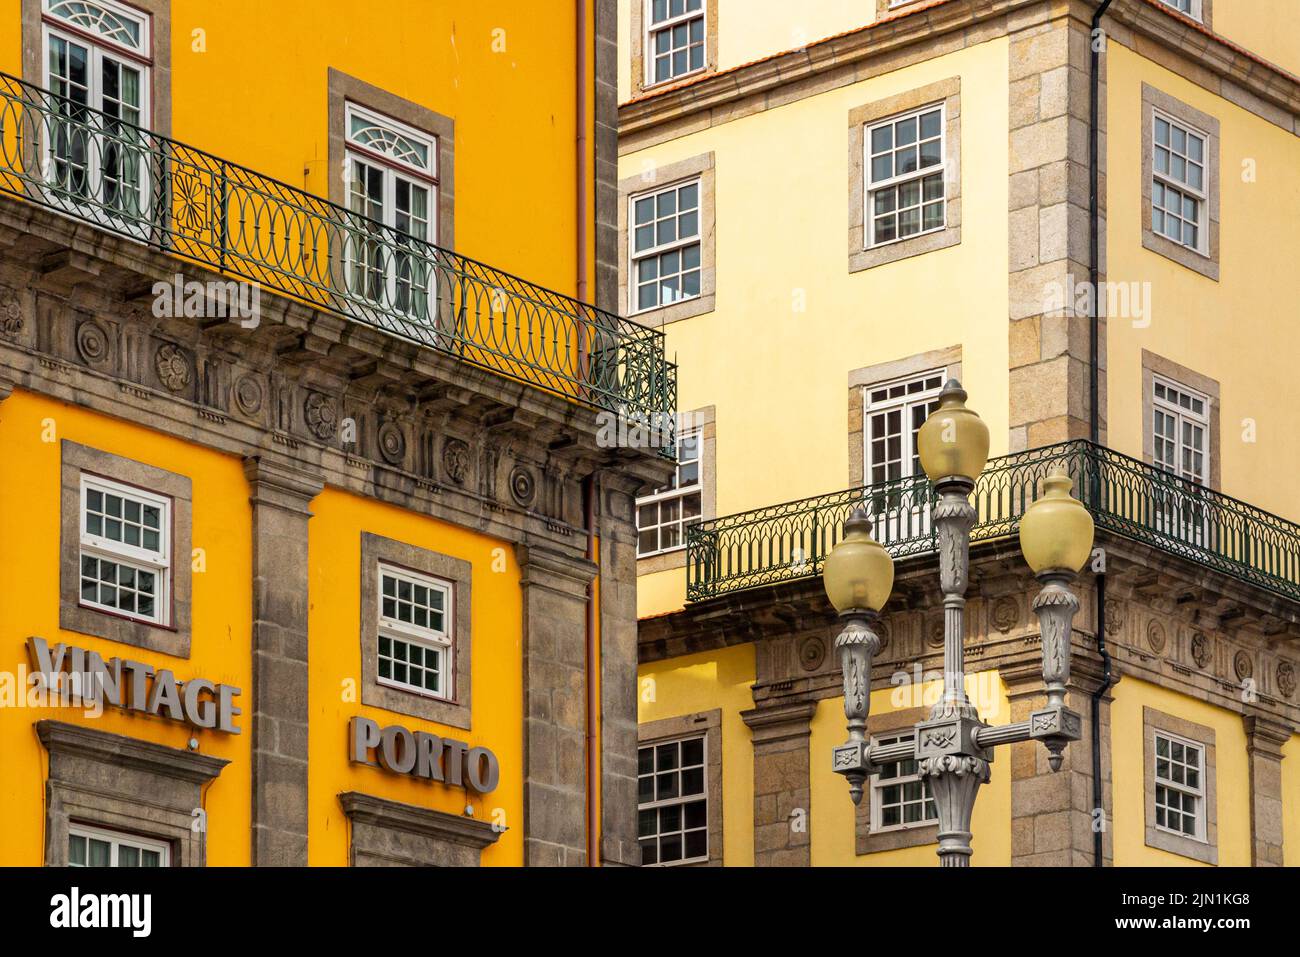 Traditional buildings with wrought iron balconies in the centre of Porto a major city in northern Portugal. Stock Photo